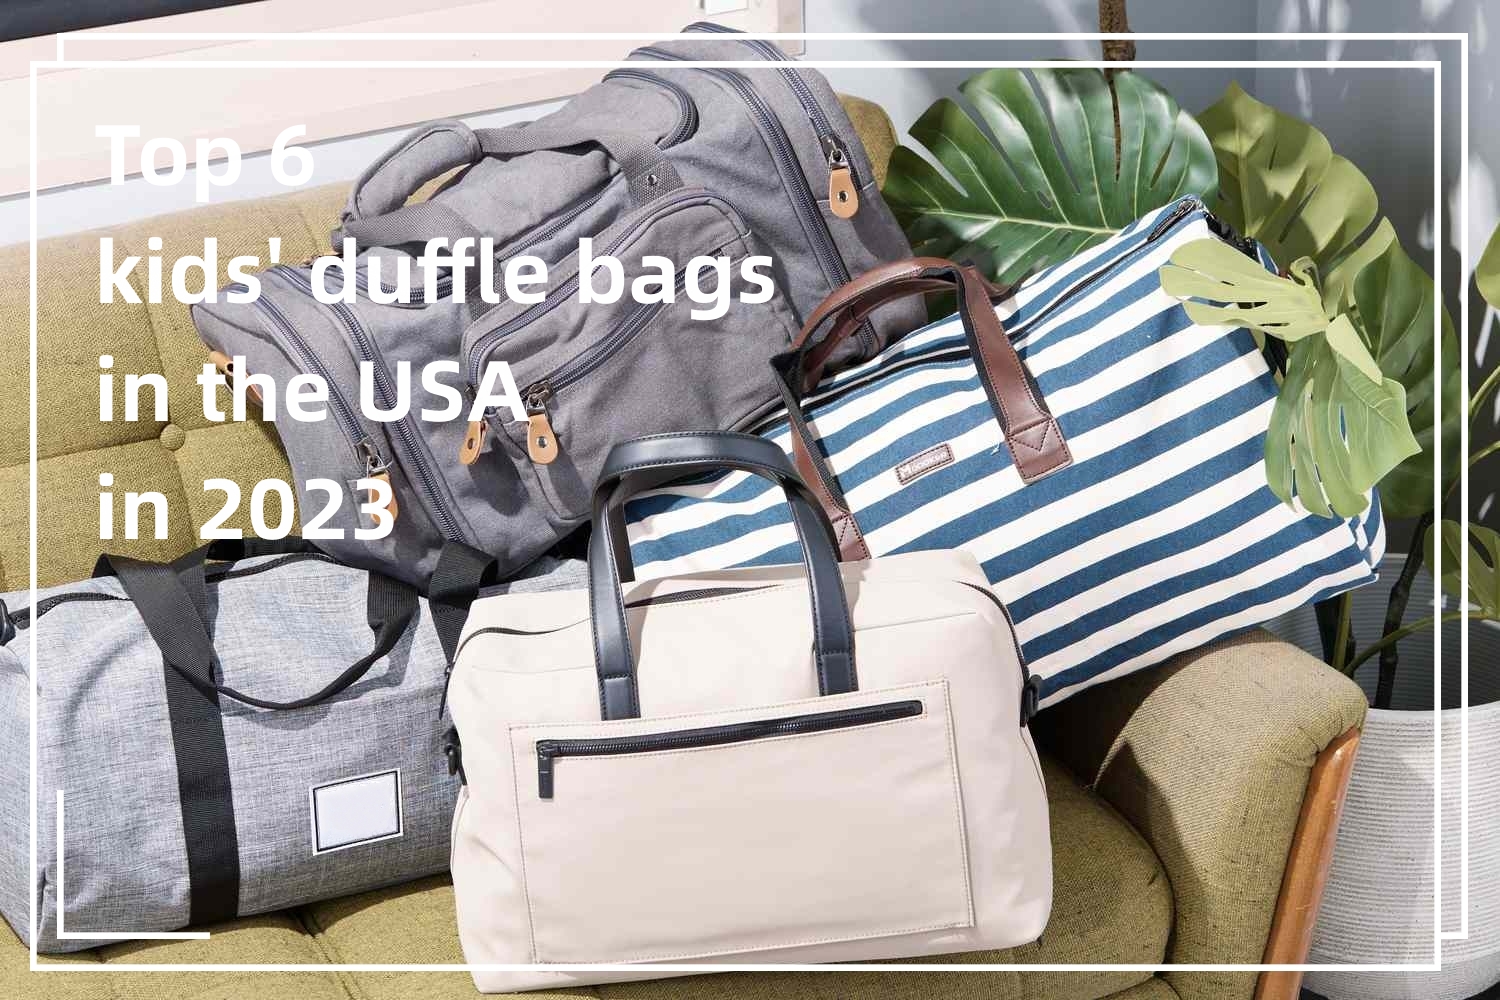 Top 6 kids' duffle bags in the USA in 2023